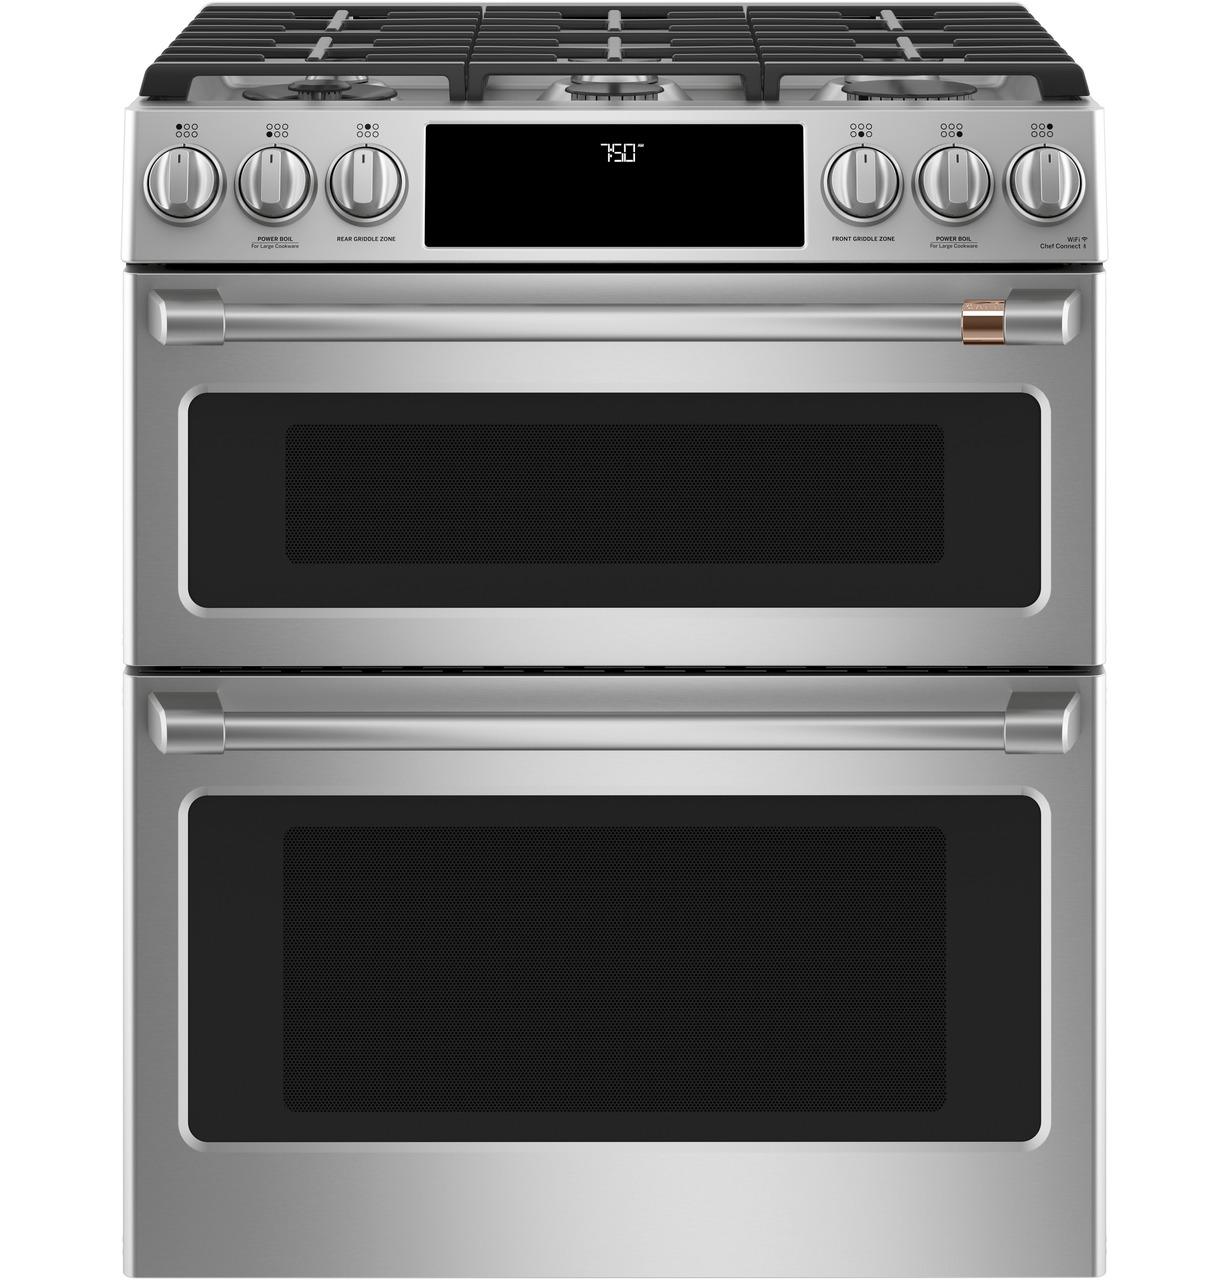 Cafe Caf(eback)™ 30" Smart Slide-In, Front-Control, Gas Double-Oven Range with Convection